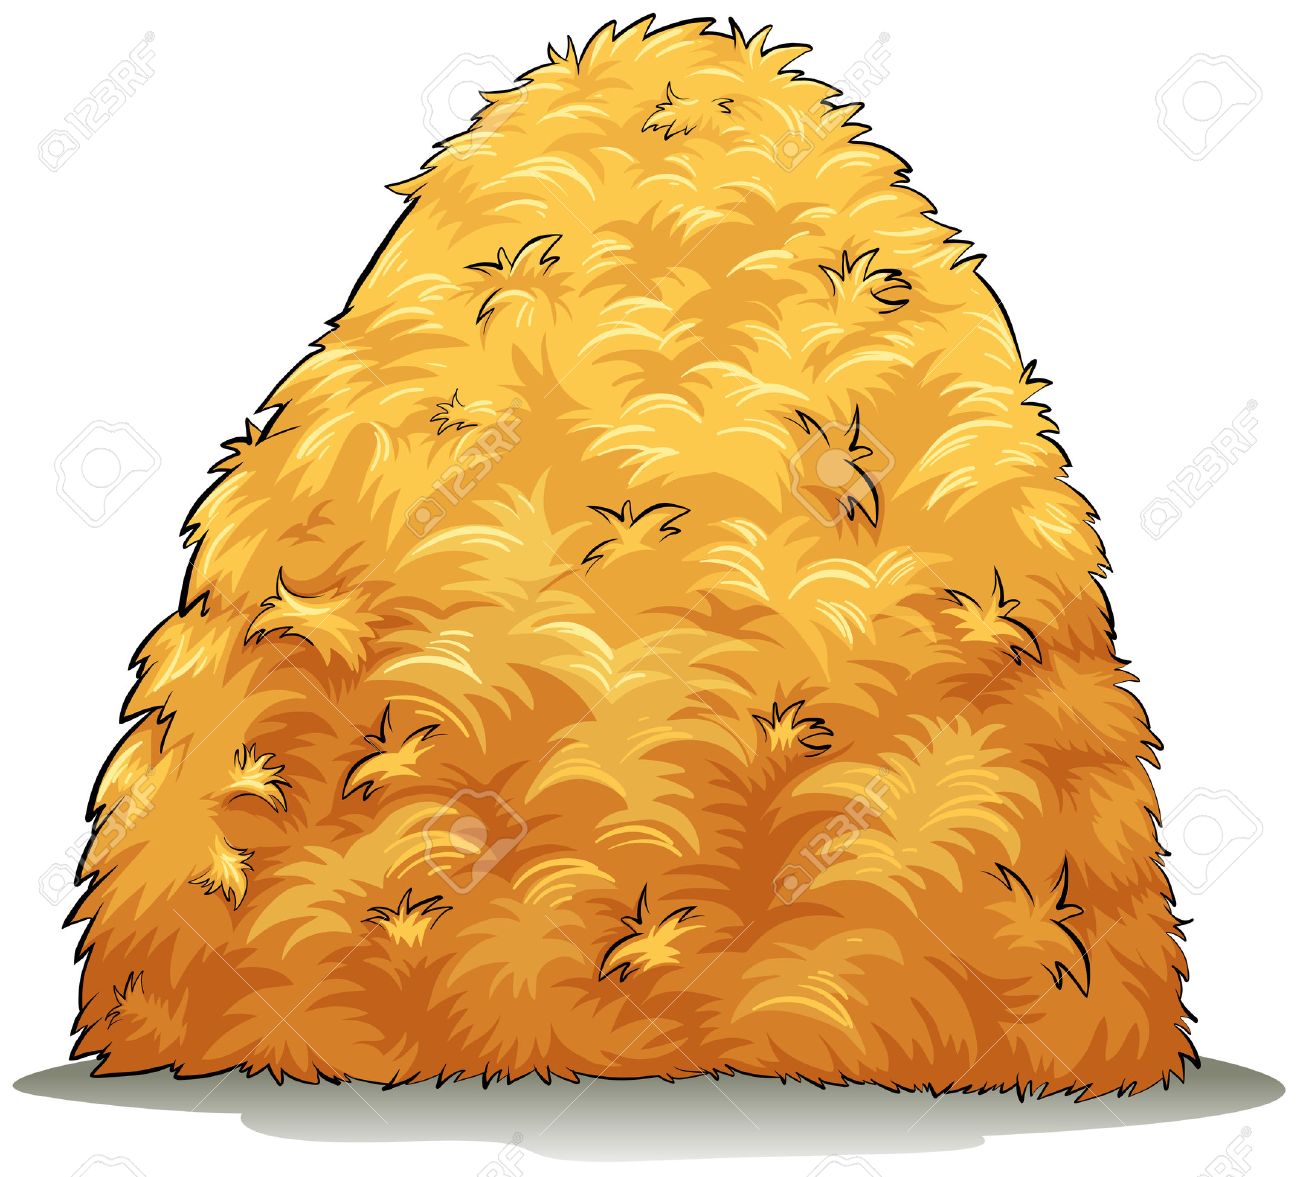 692 Hay free clipart.